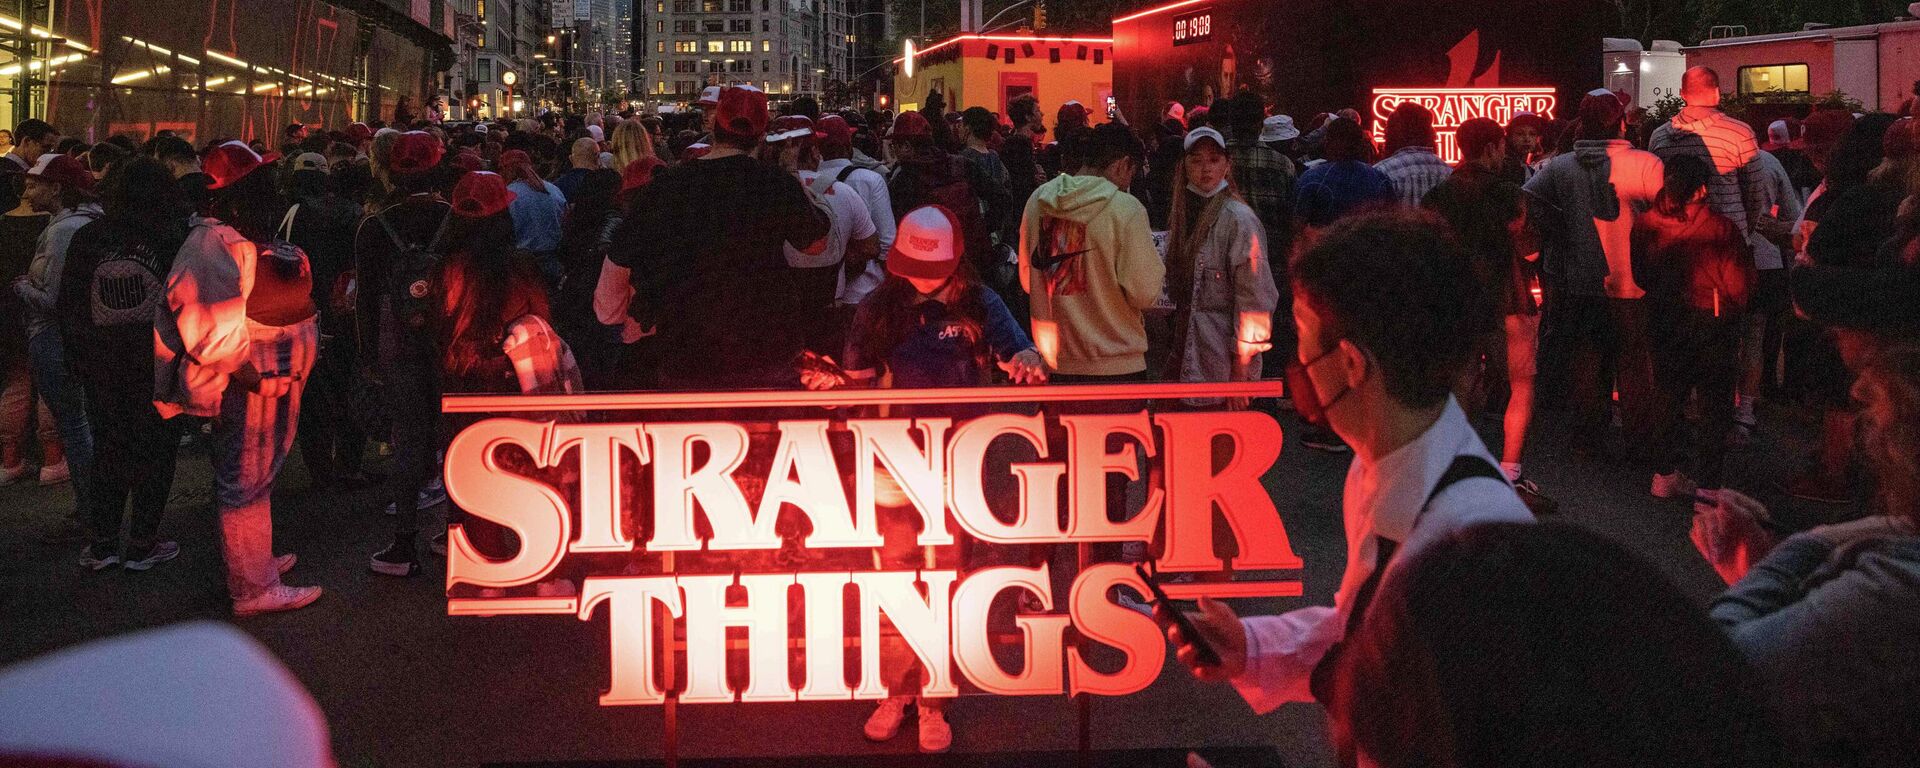 People attend the Stranger Things 4 global fan event at Flatiron Plaza in New York on May 26, 2022. - Sputnik International, 1920, 02.07.2022